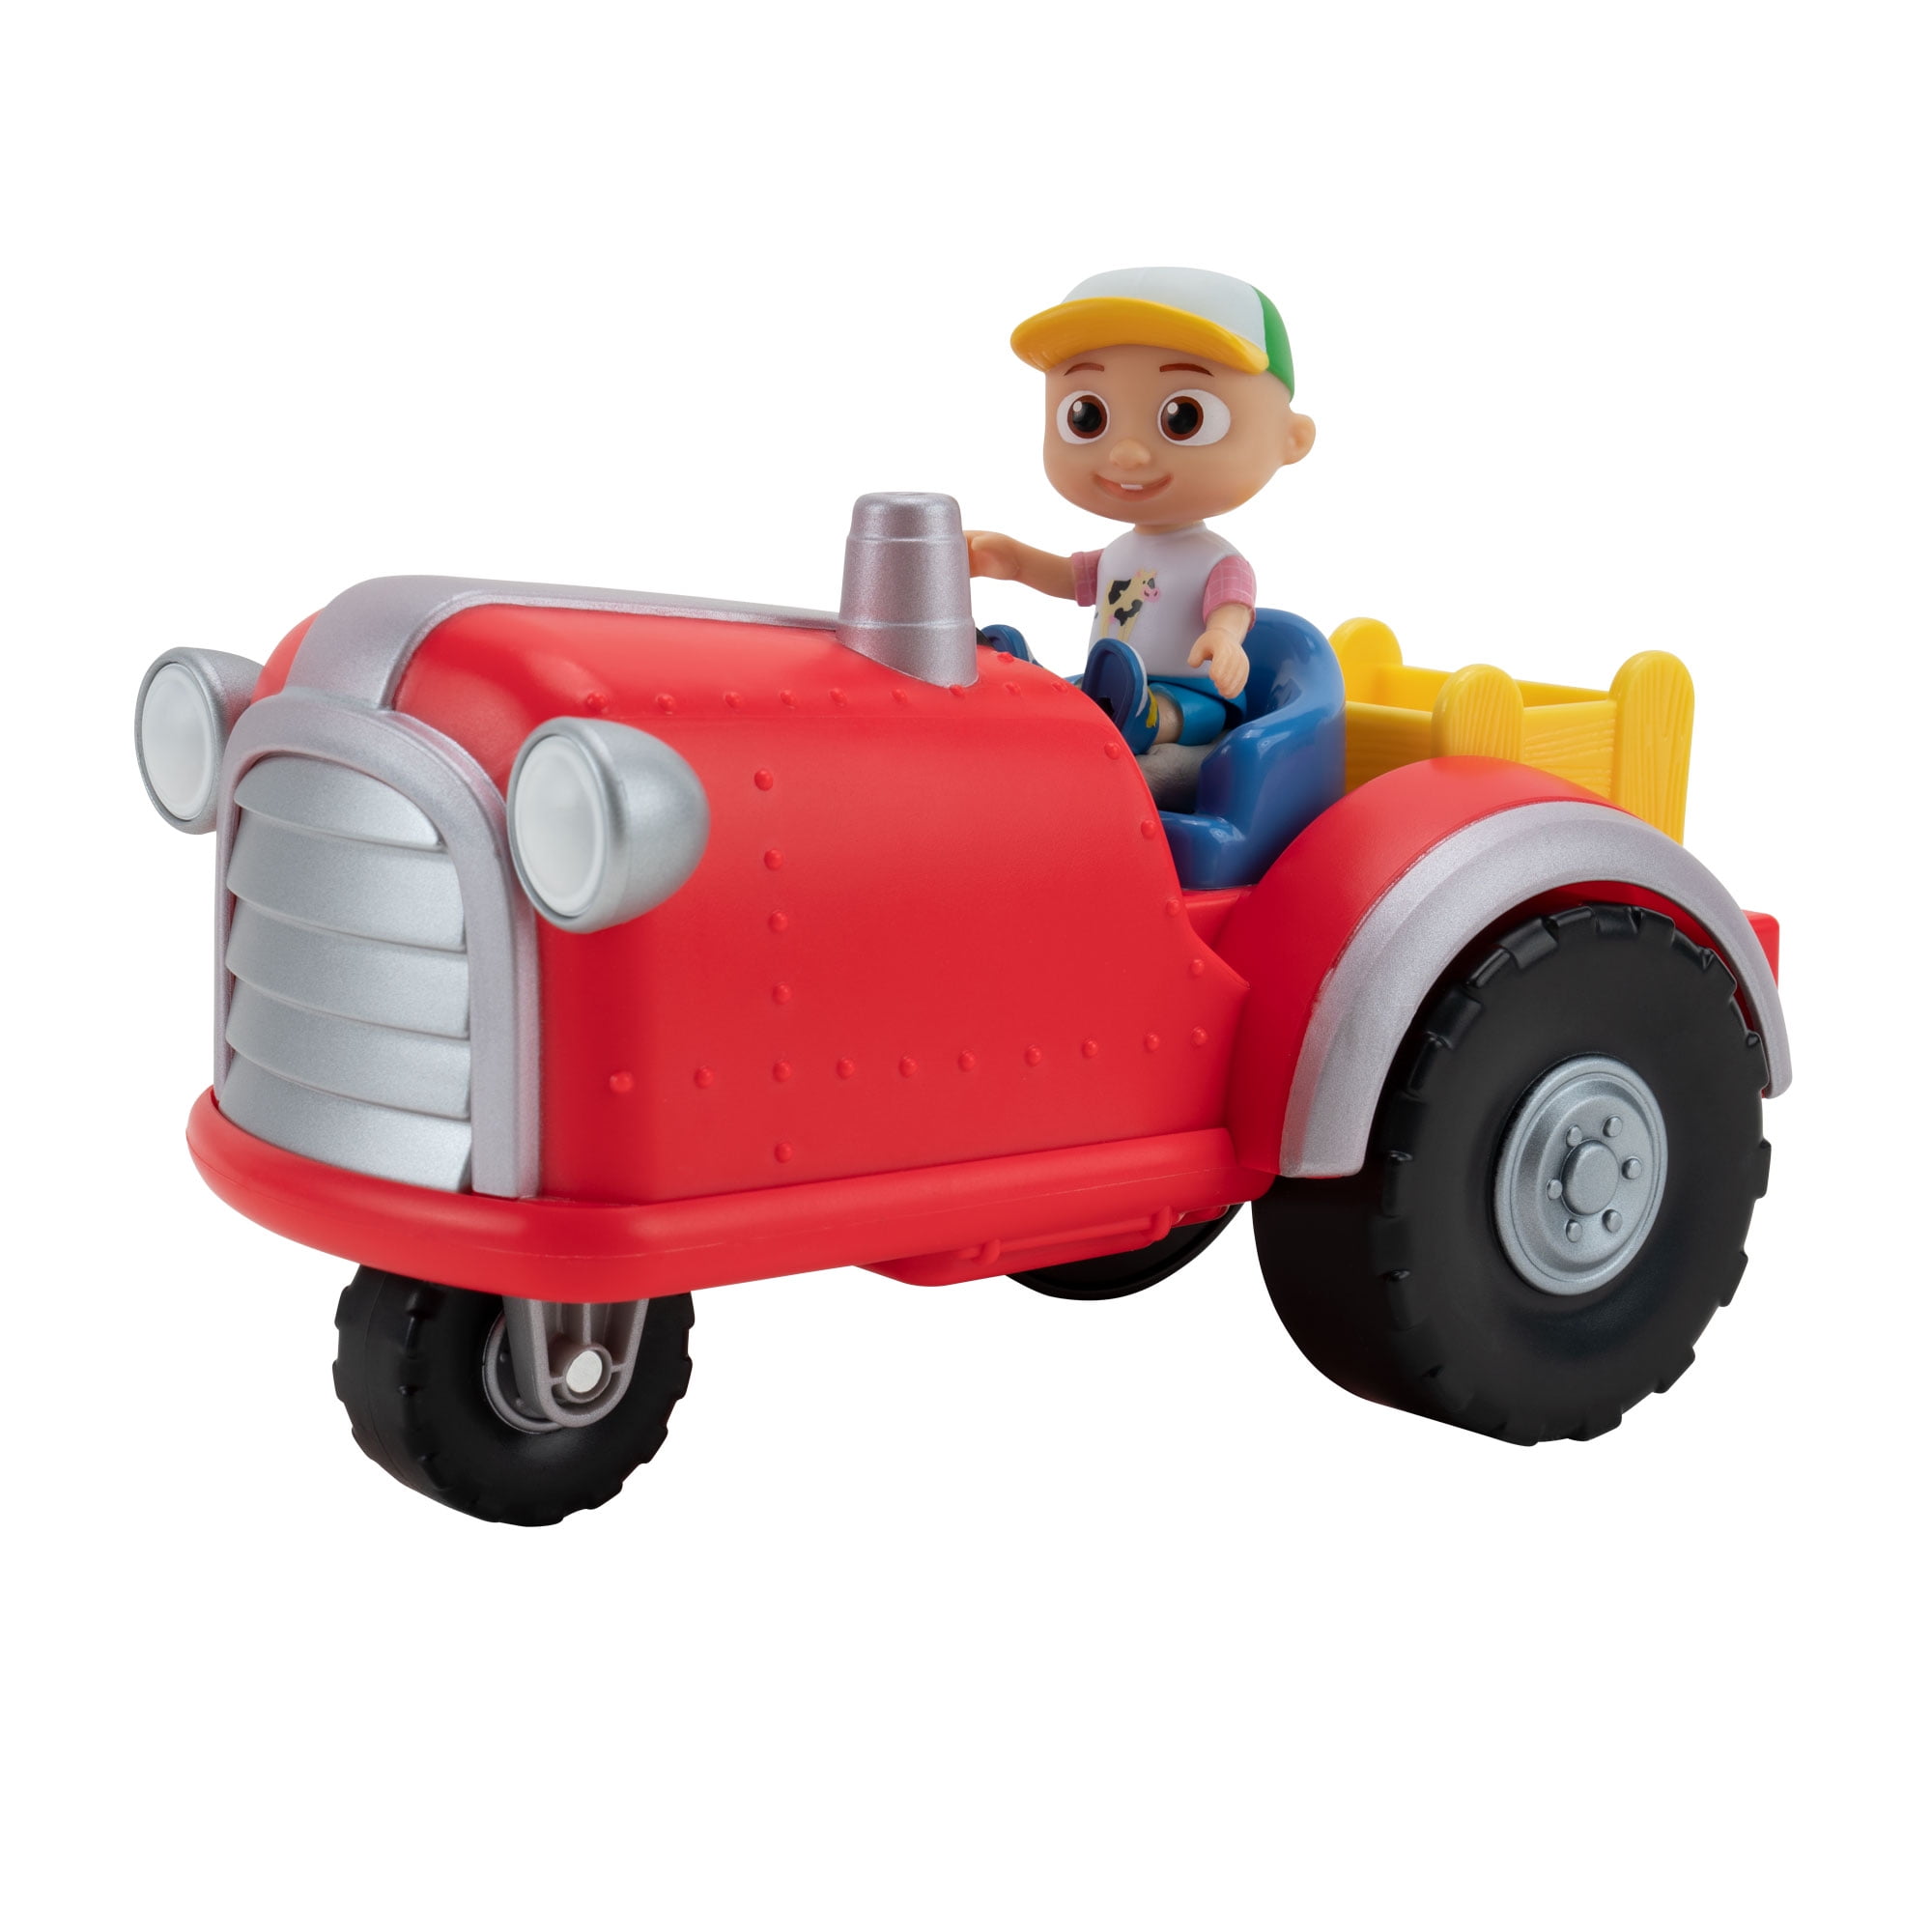 CoComelon Official Musical Tractor Feature Vehicle 